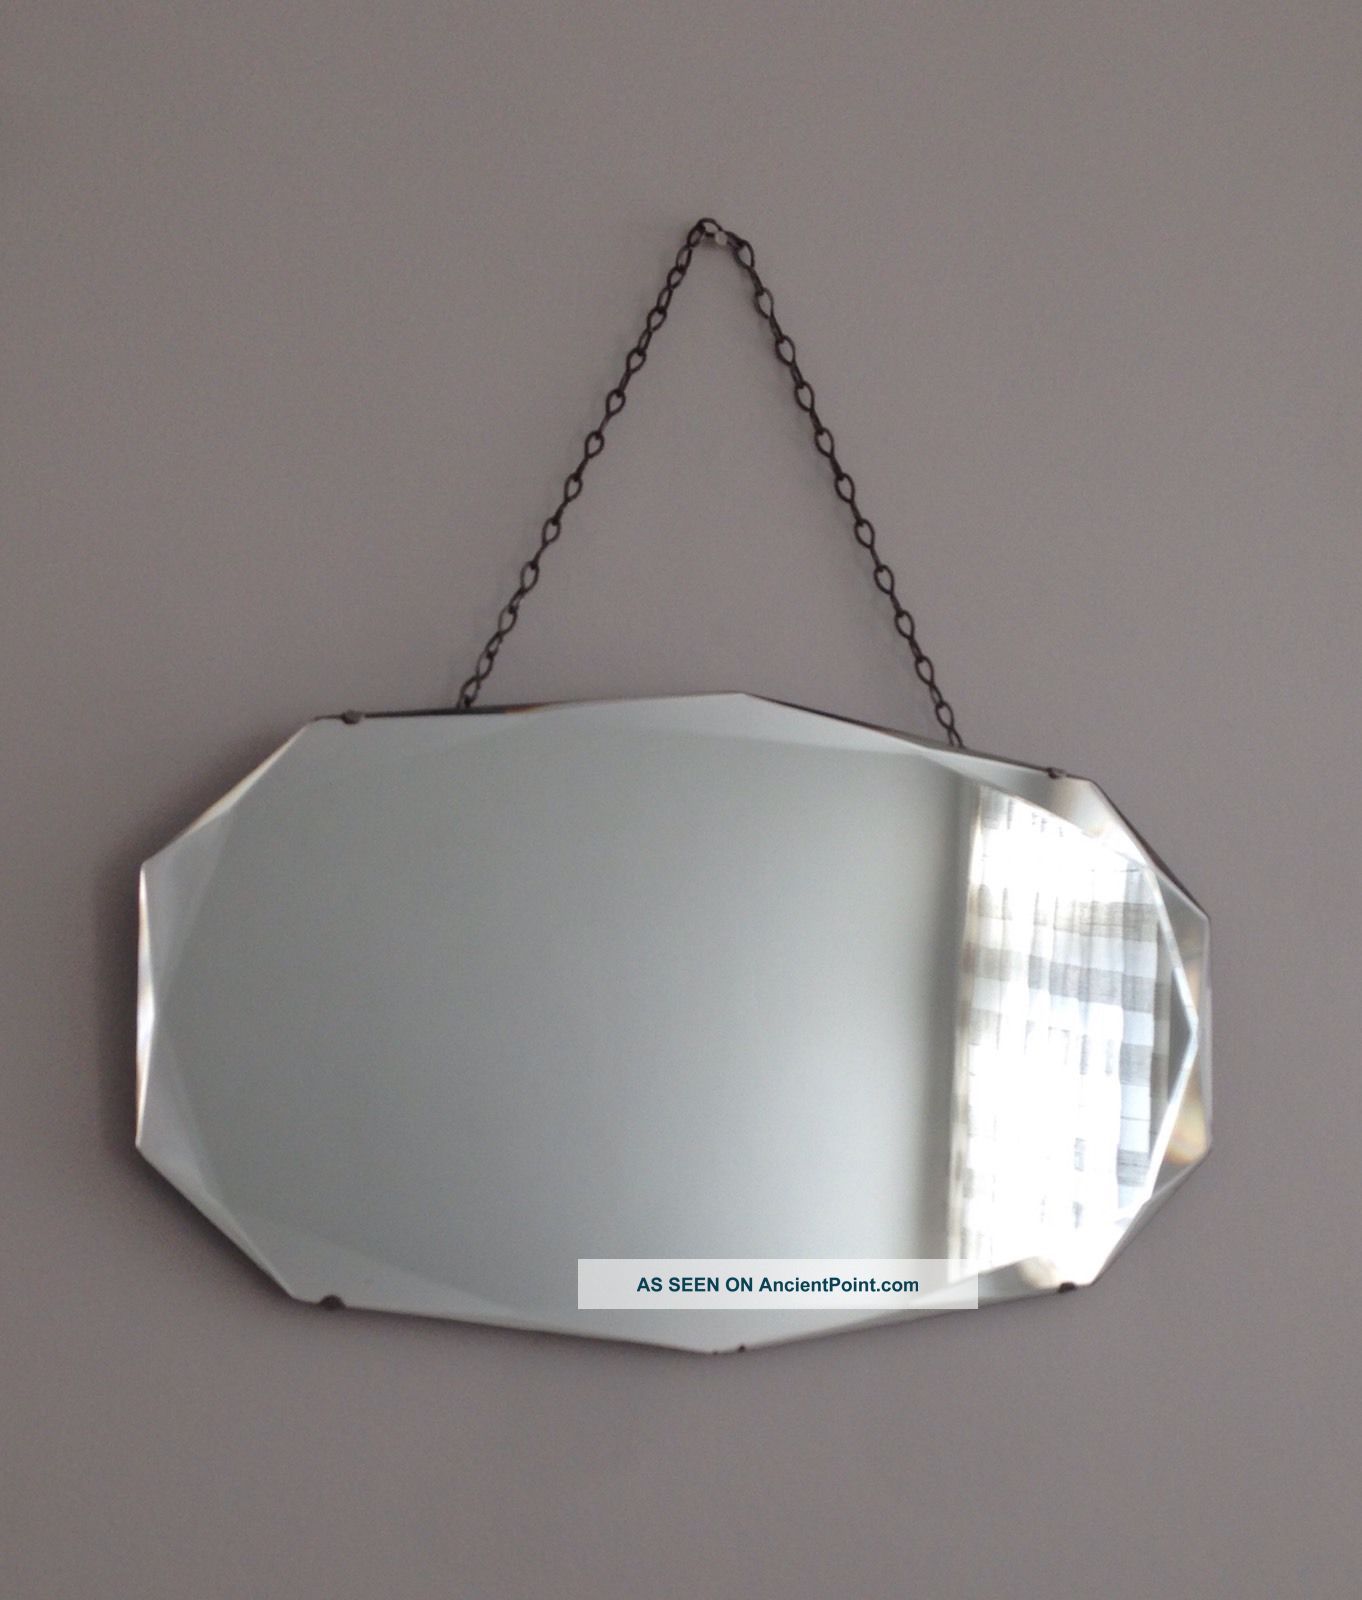 Vintage Art Deco Iconic Frameless Beveled Edge Hanging Wall Mirror With Chain 20th Century photo